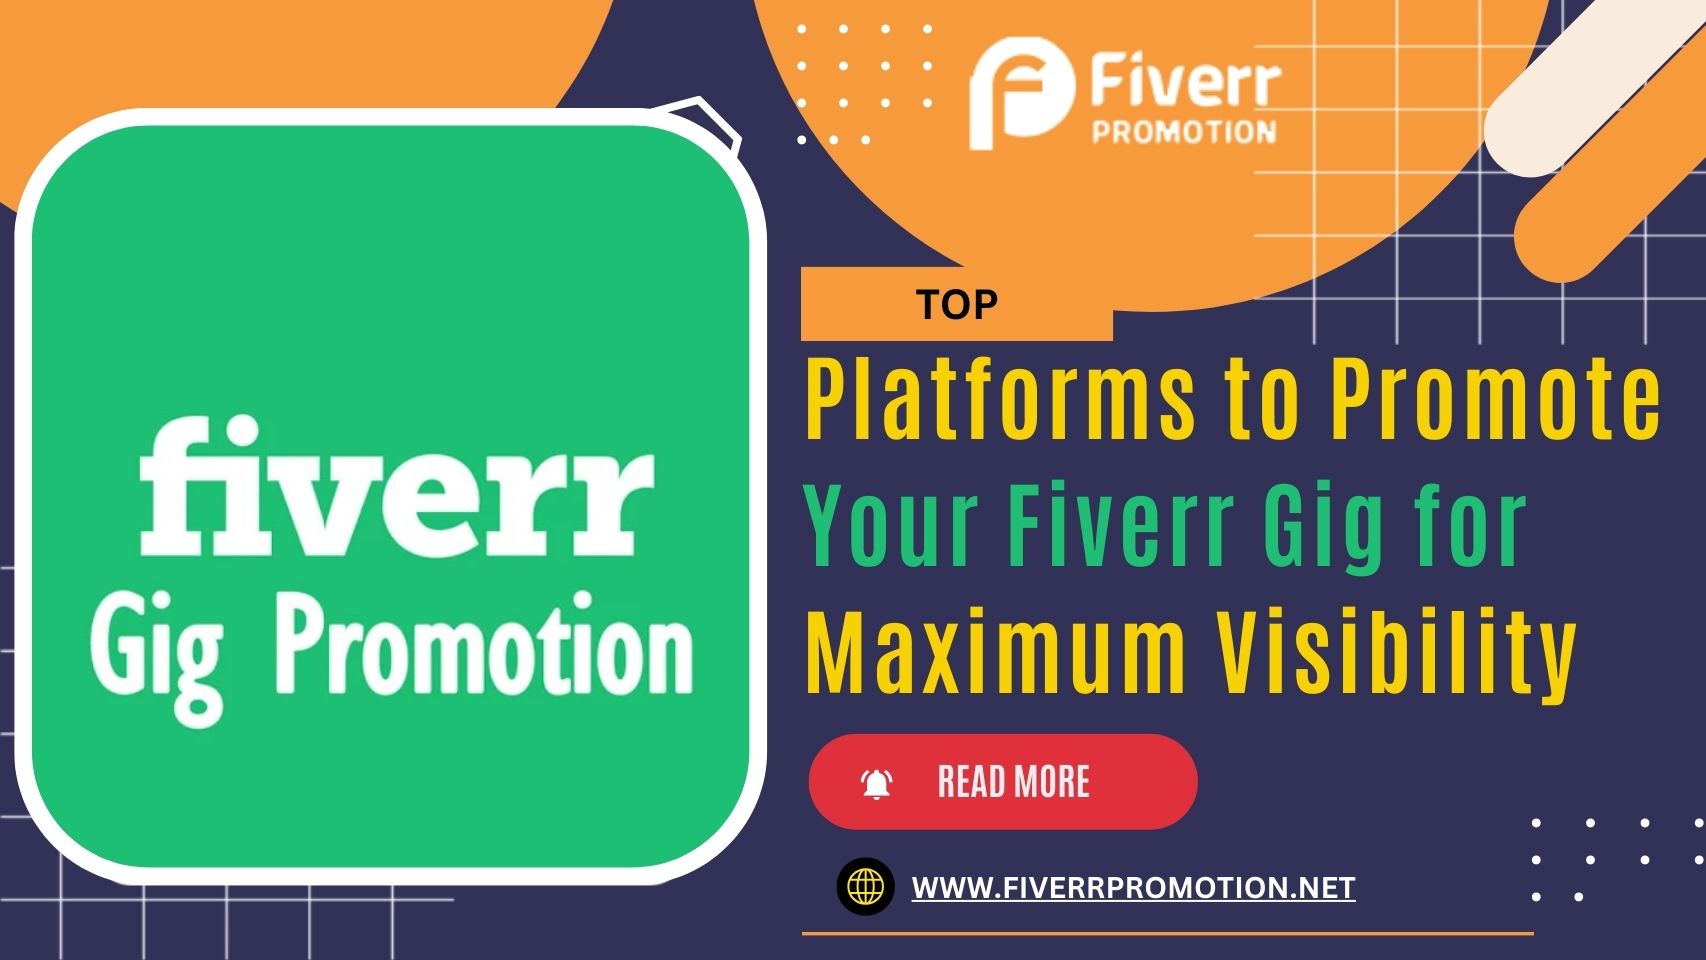 Top Platforms to Promote Your Fiverr Gig for Maximum Visibility